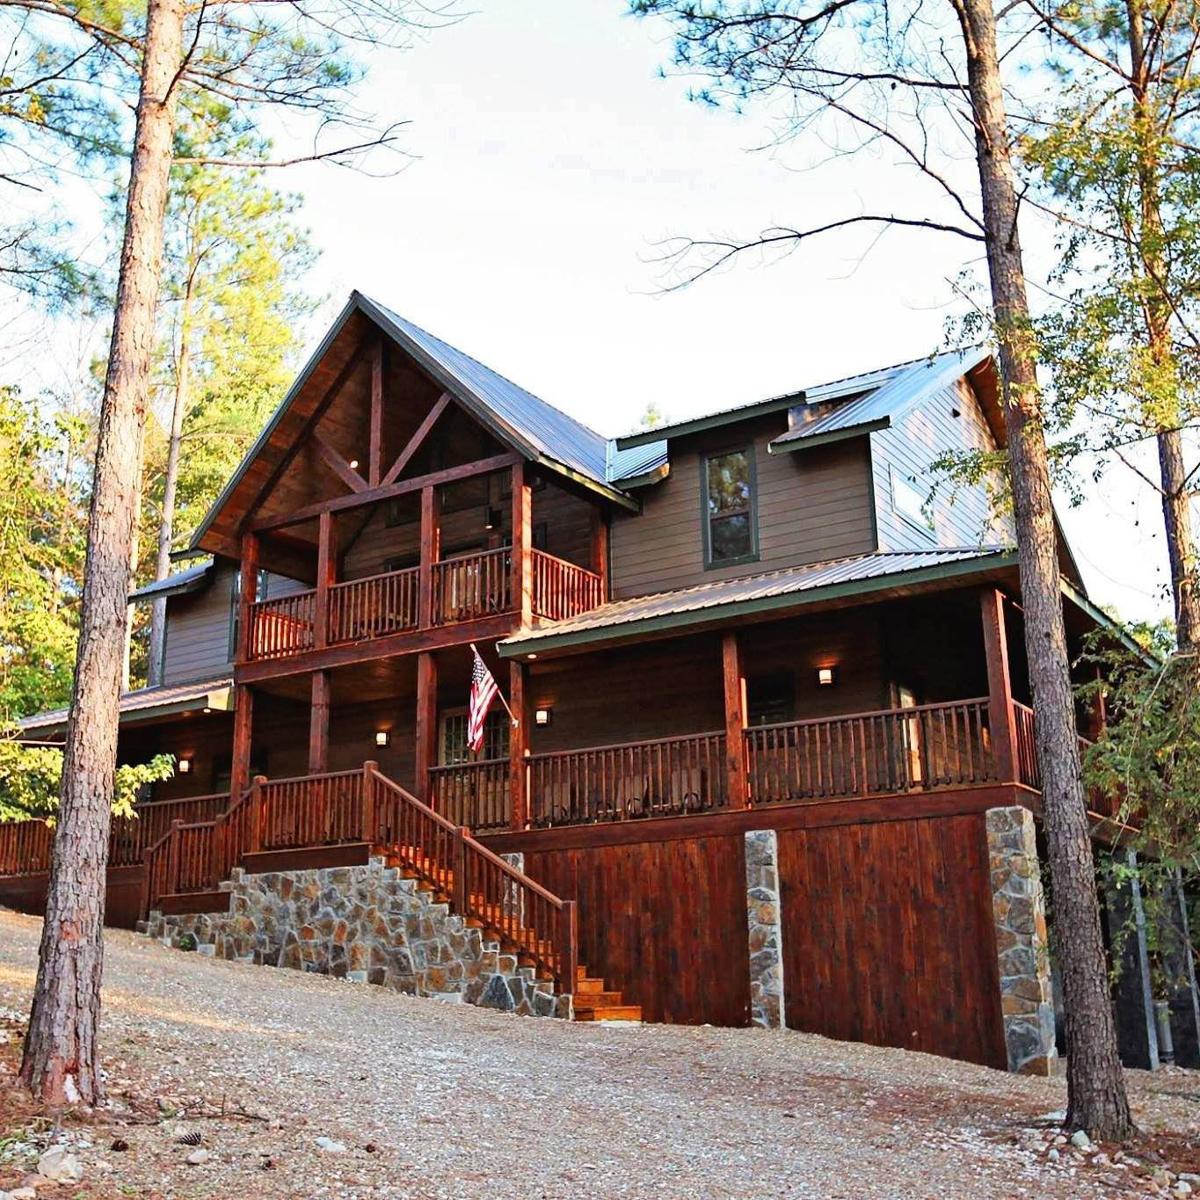 Luxury Cabins In Oklahoma Perfect For Romantic Getaways Or Family